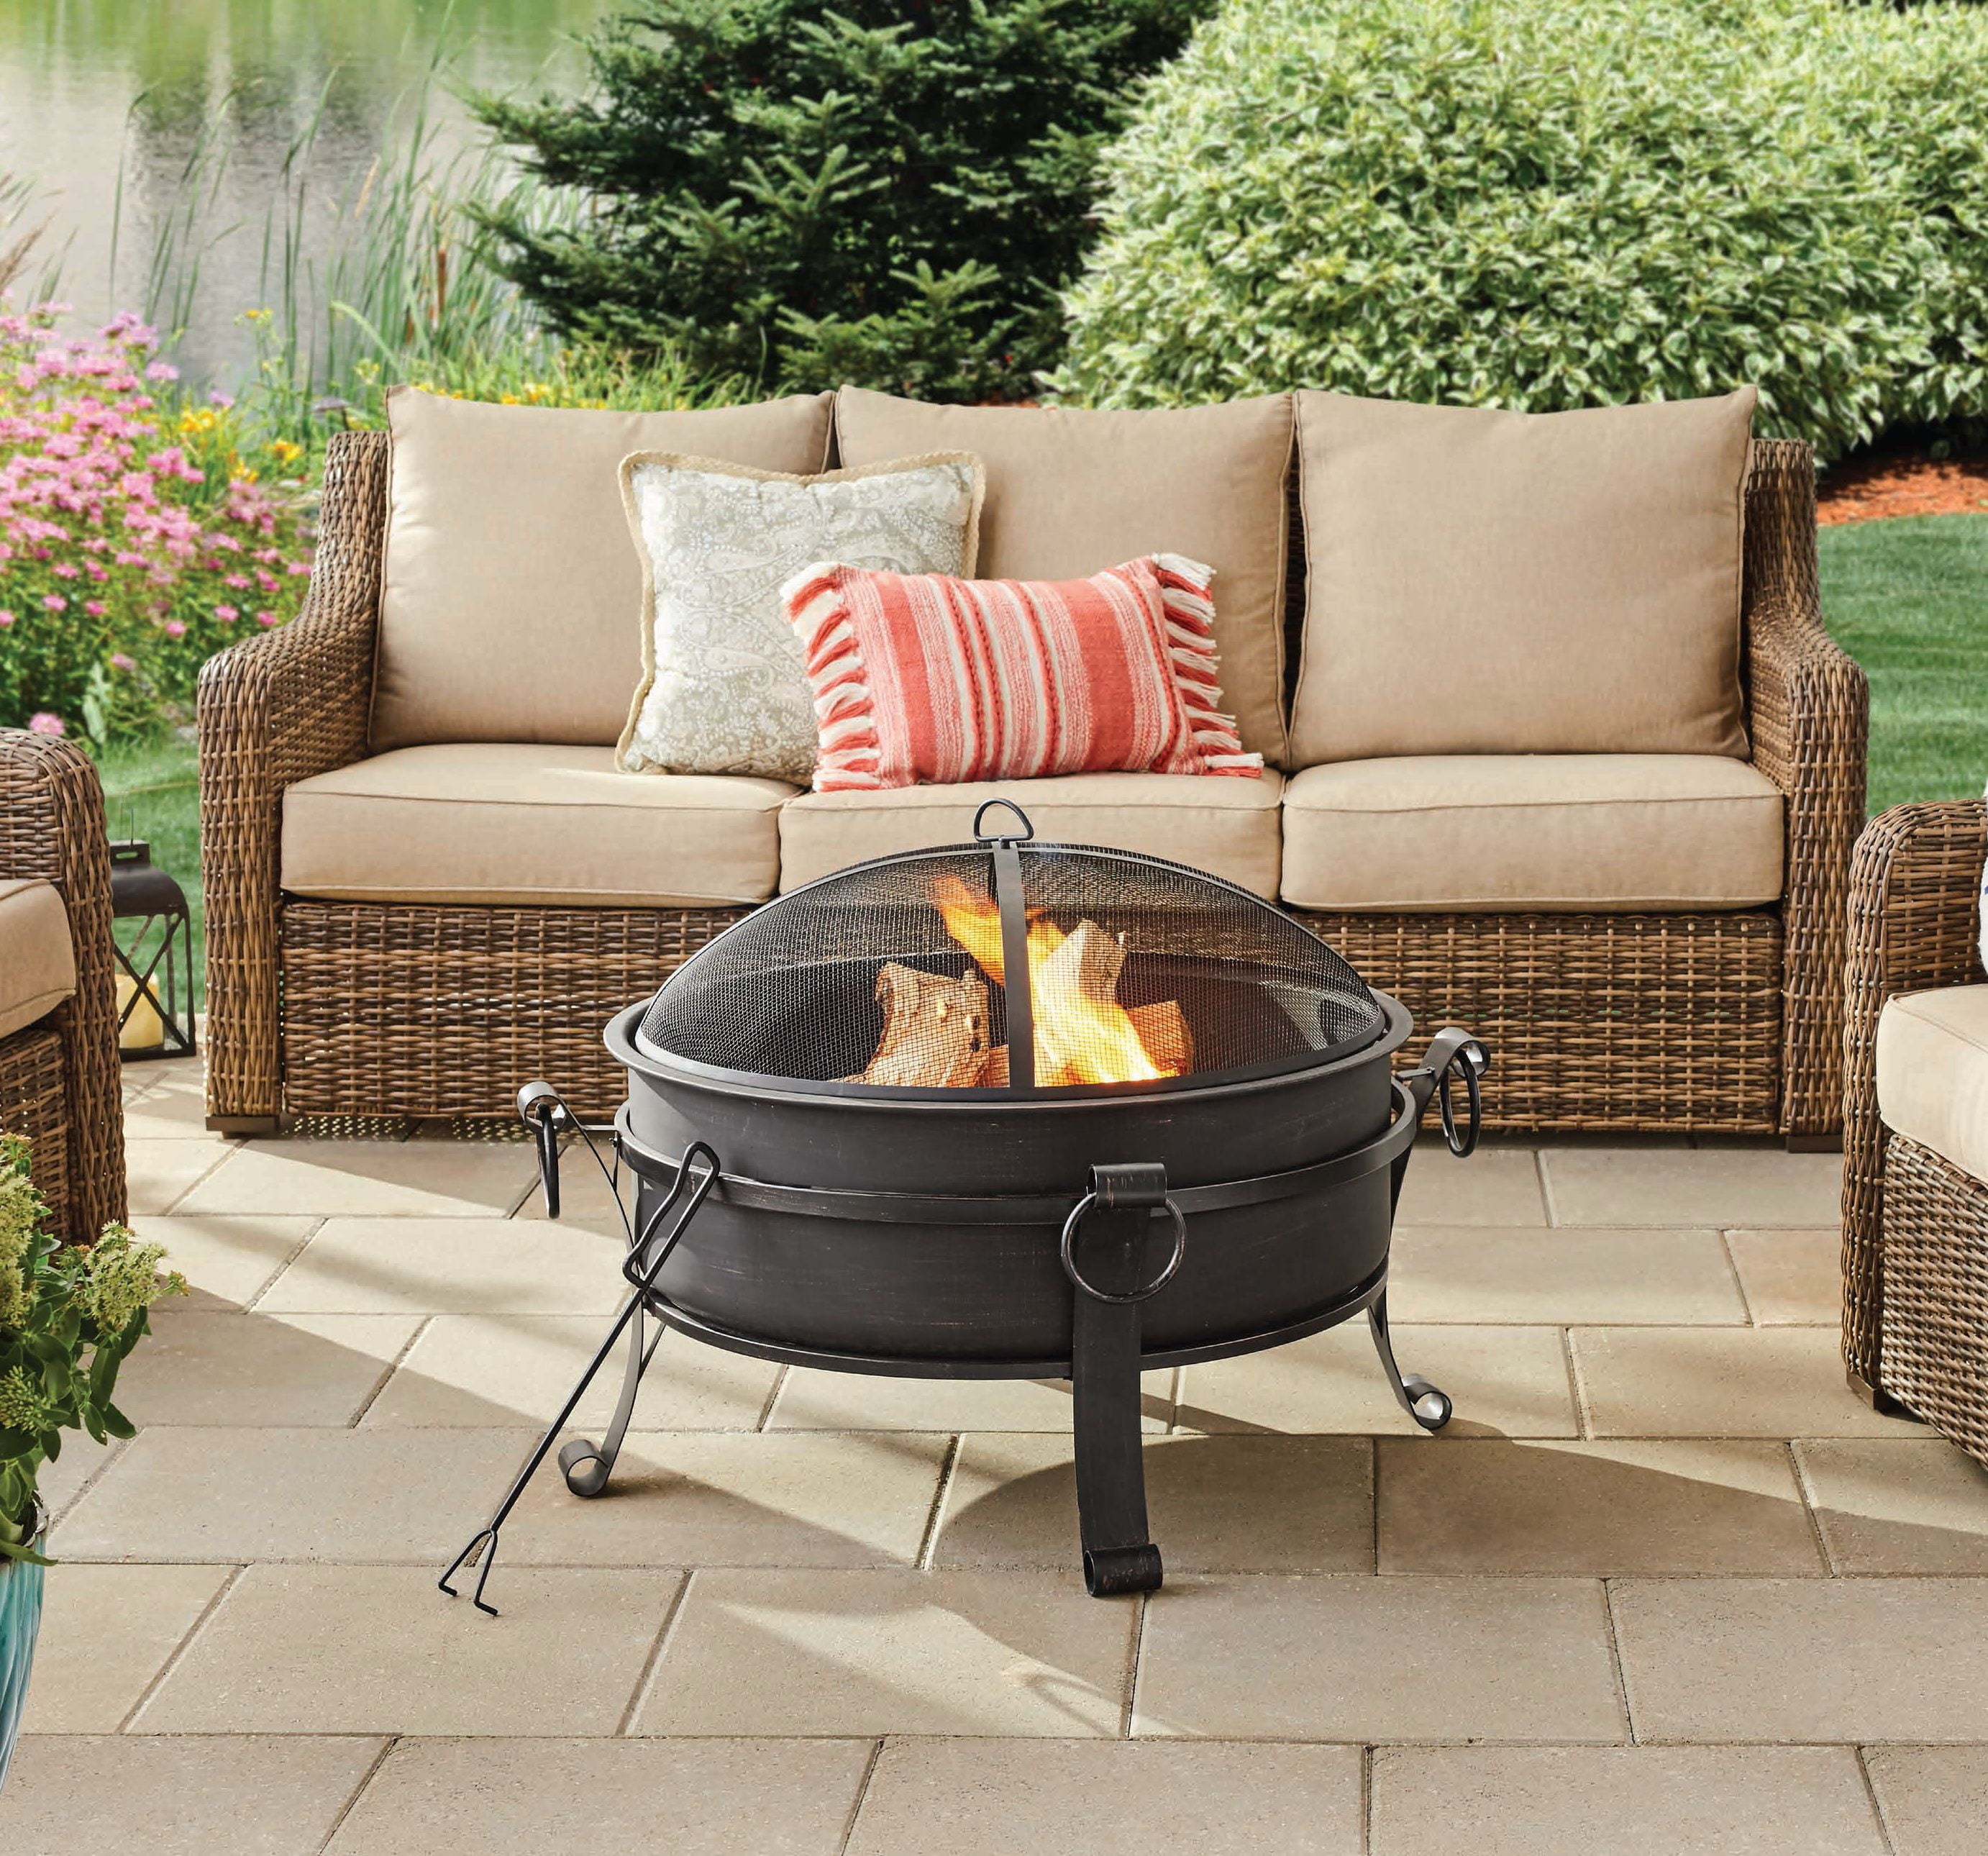 Details about   Portable Steel 28" Patio Fireplace Wood Burning Fire Pit Bowl with Spark Guard 